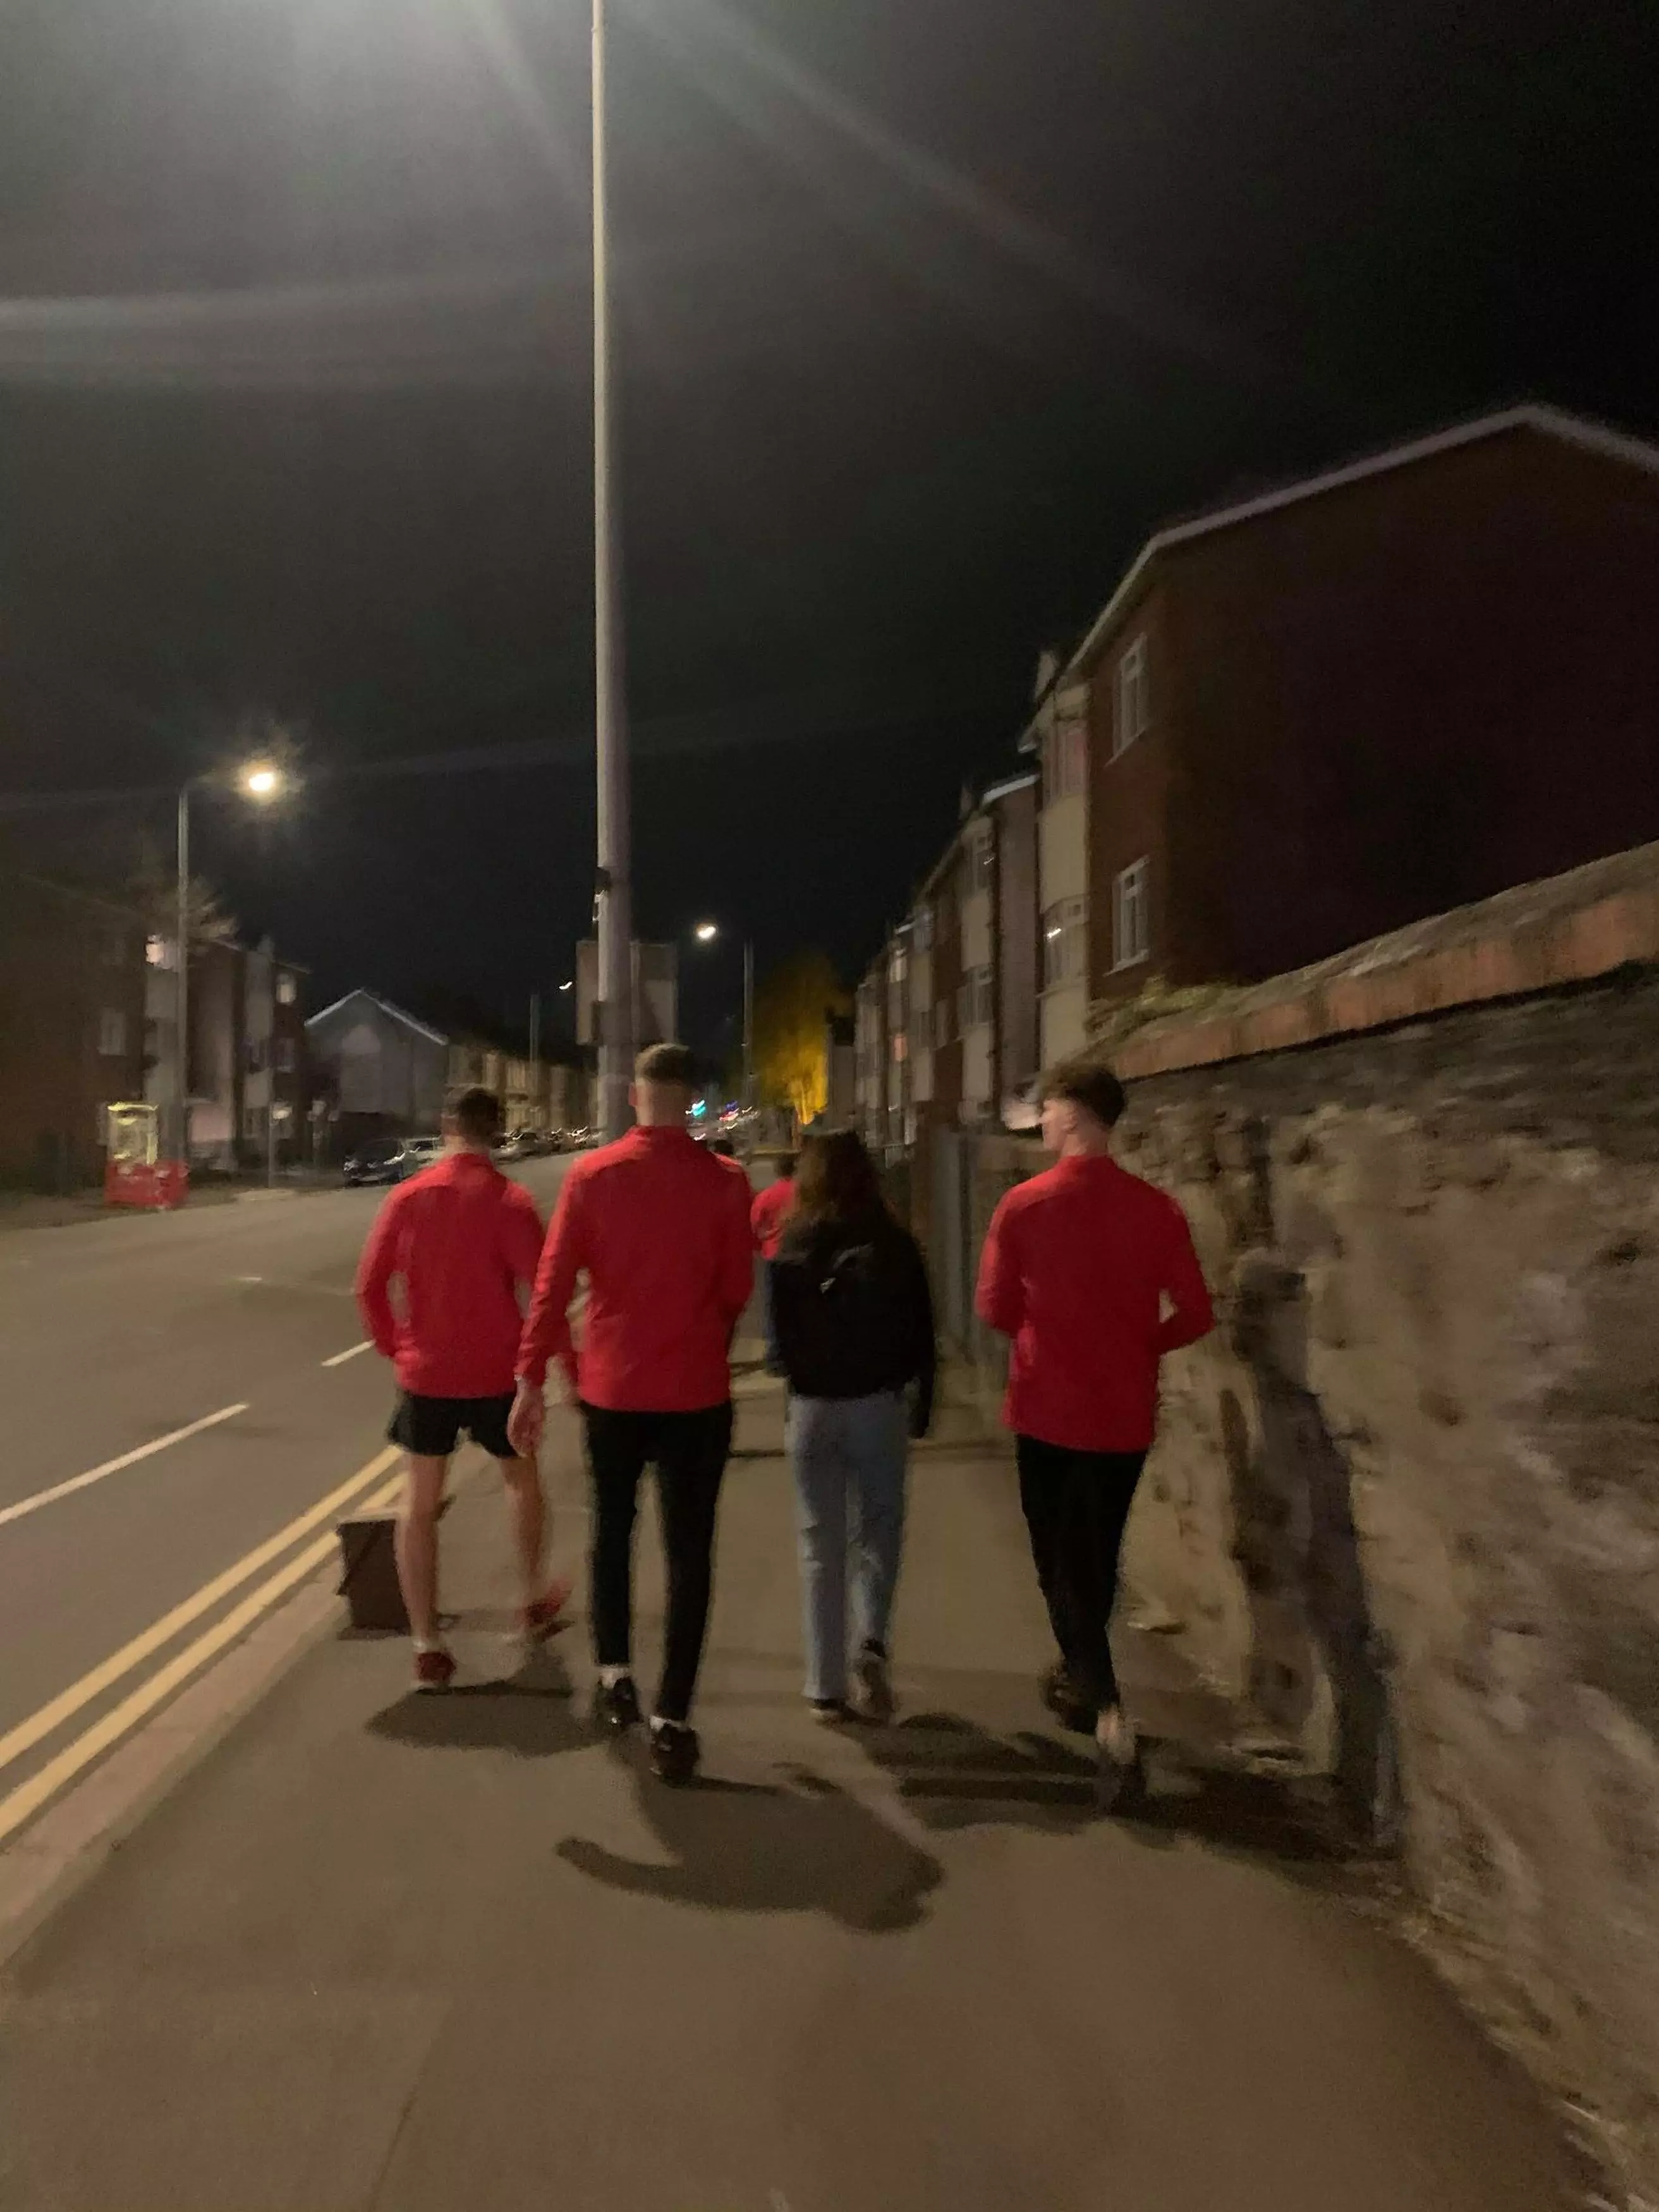 The lads walking a fellow student home.